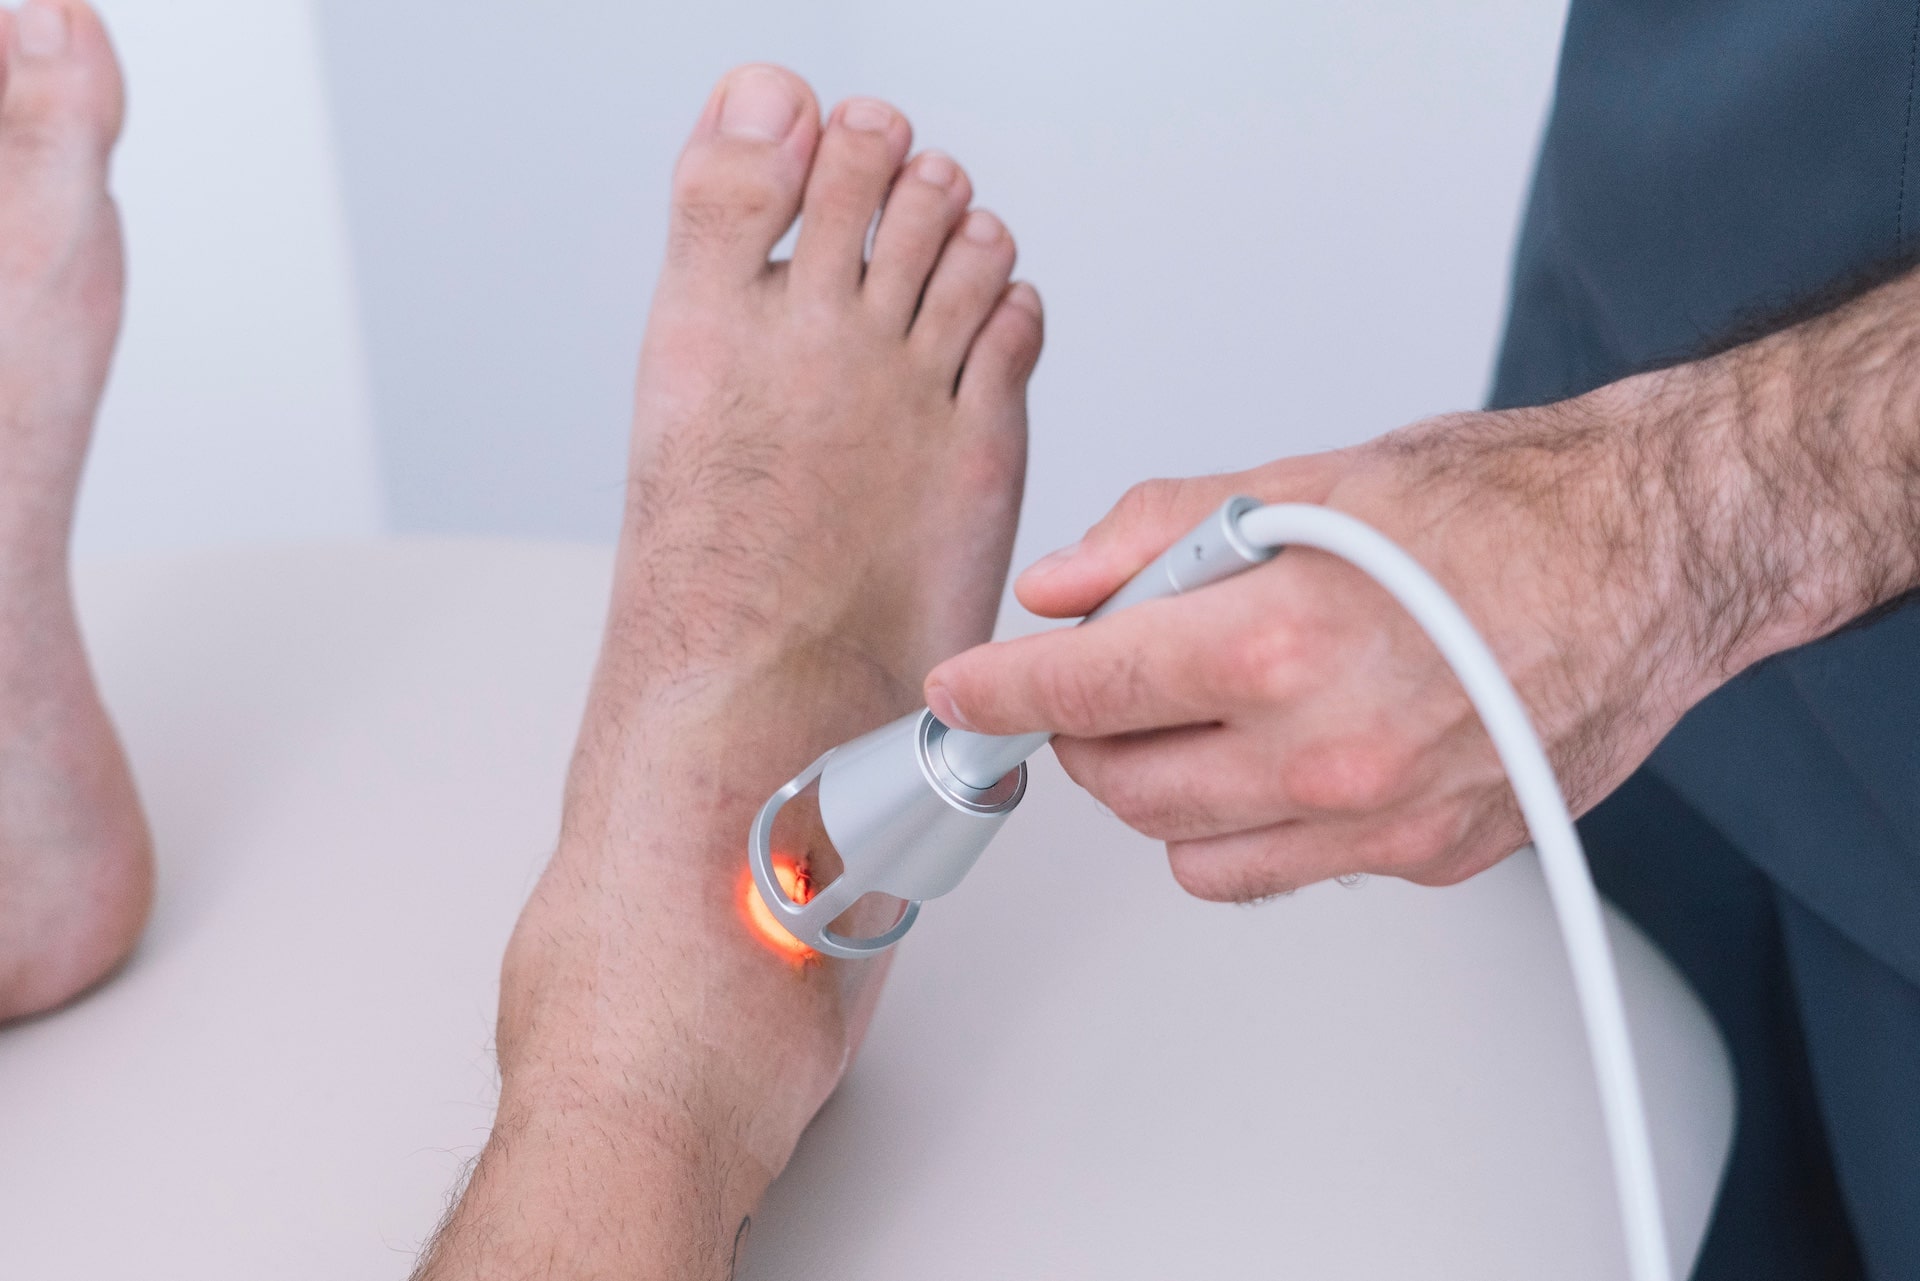 Laser therapy being performed on foot